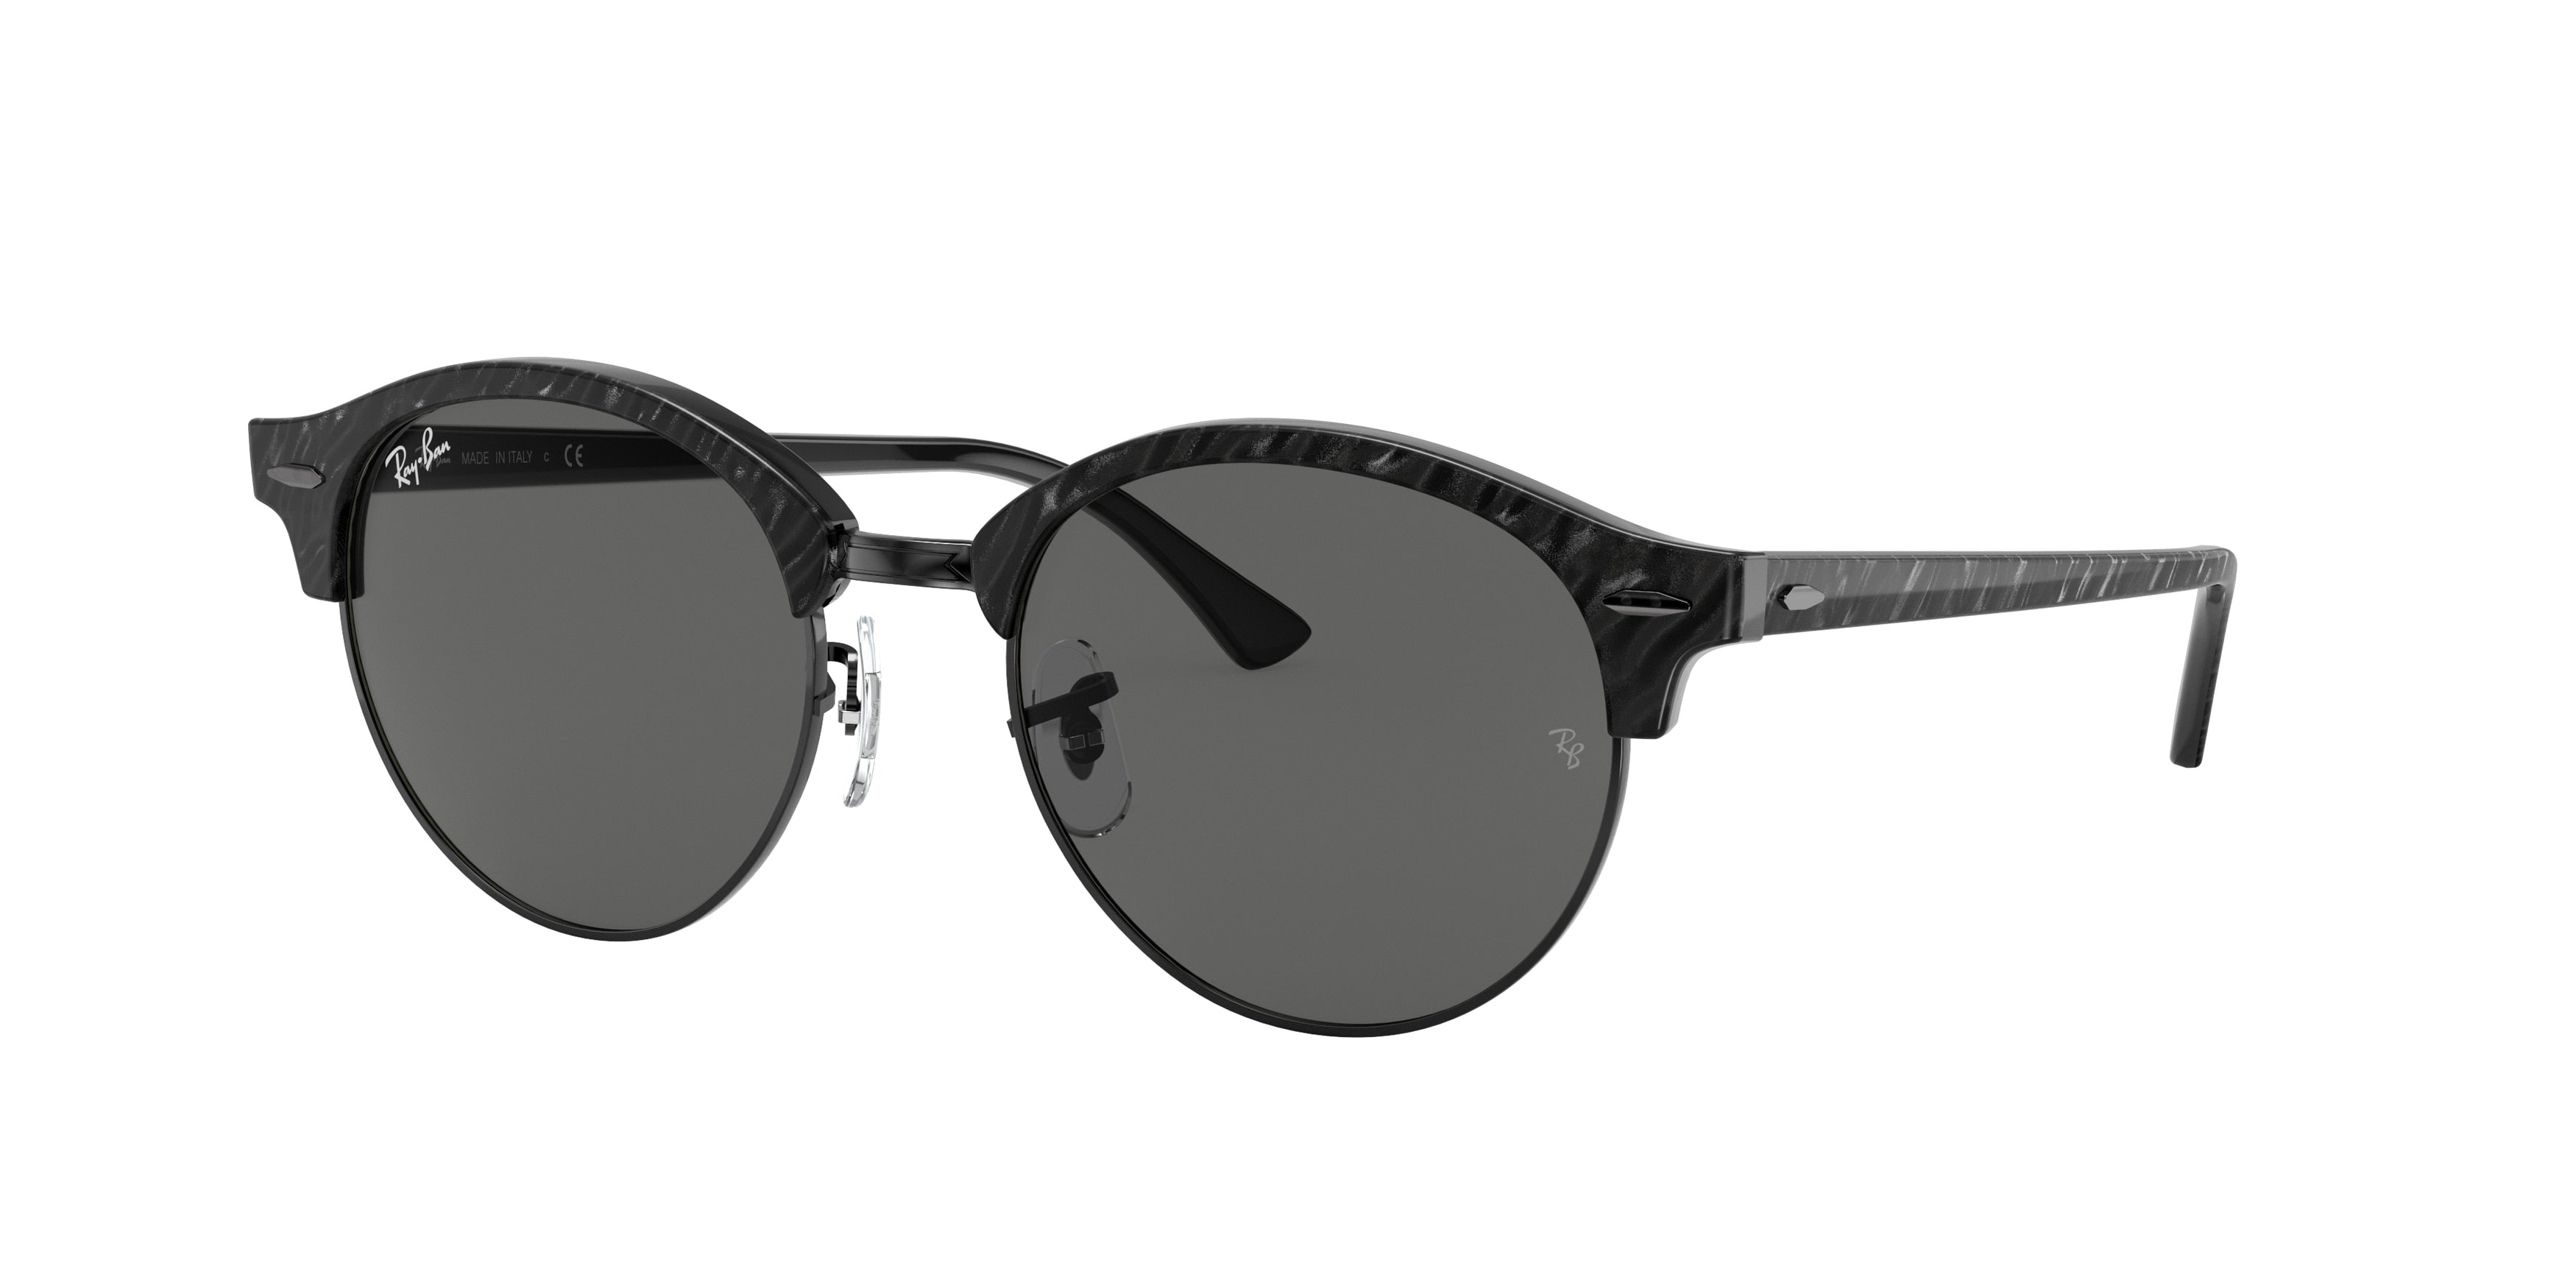 Ray-Ban CLUBROUND RB4246 Round Sunglasses  1305B1-Black 51-145-19 - Color Map Black